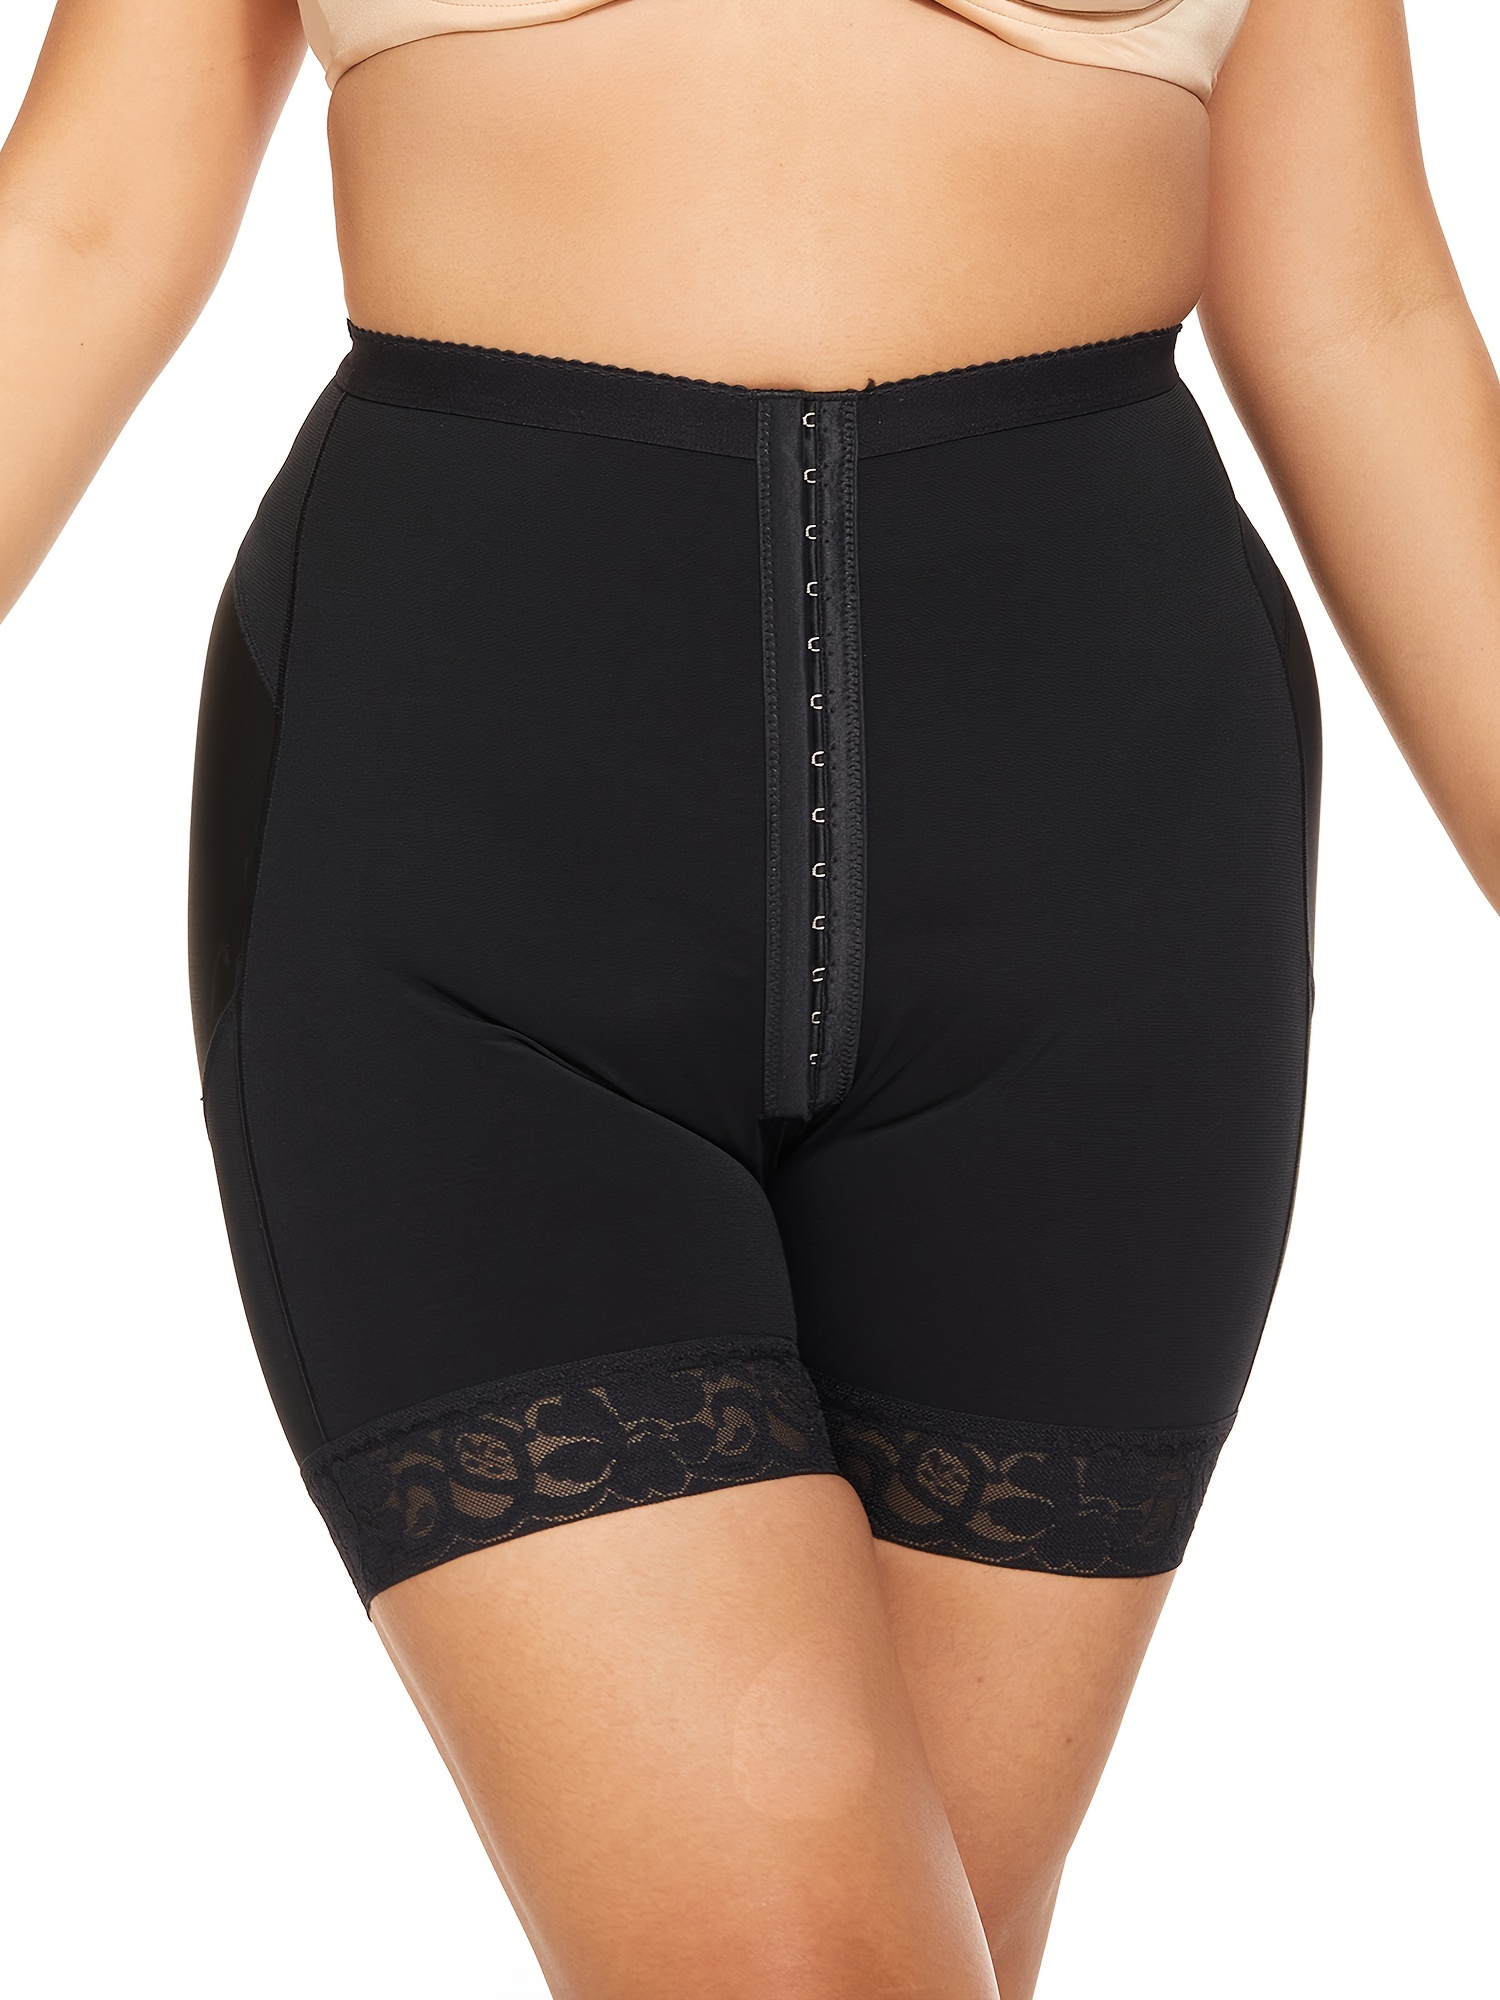 Front Buckle Closure Lace Compression Shaping Crotchless Panties, Sexy High  Waist Tummy Control Breathable Boyshort Panties, Women's Underwear & Shape